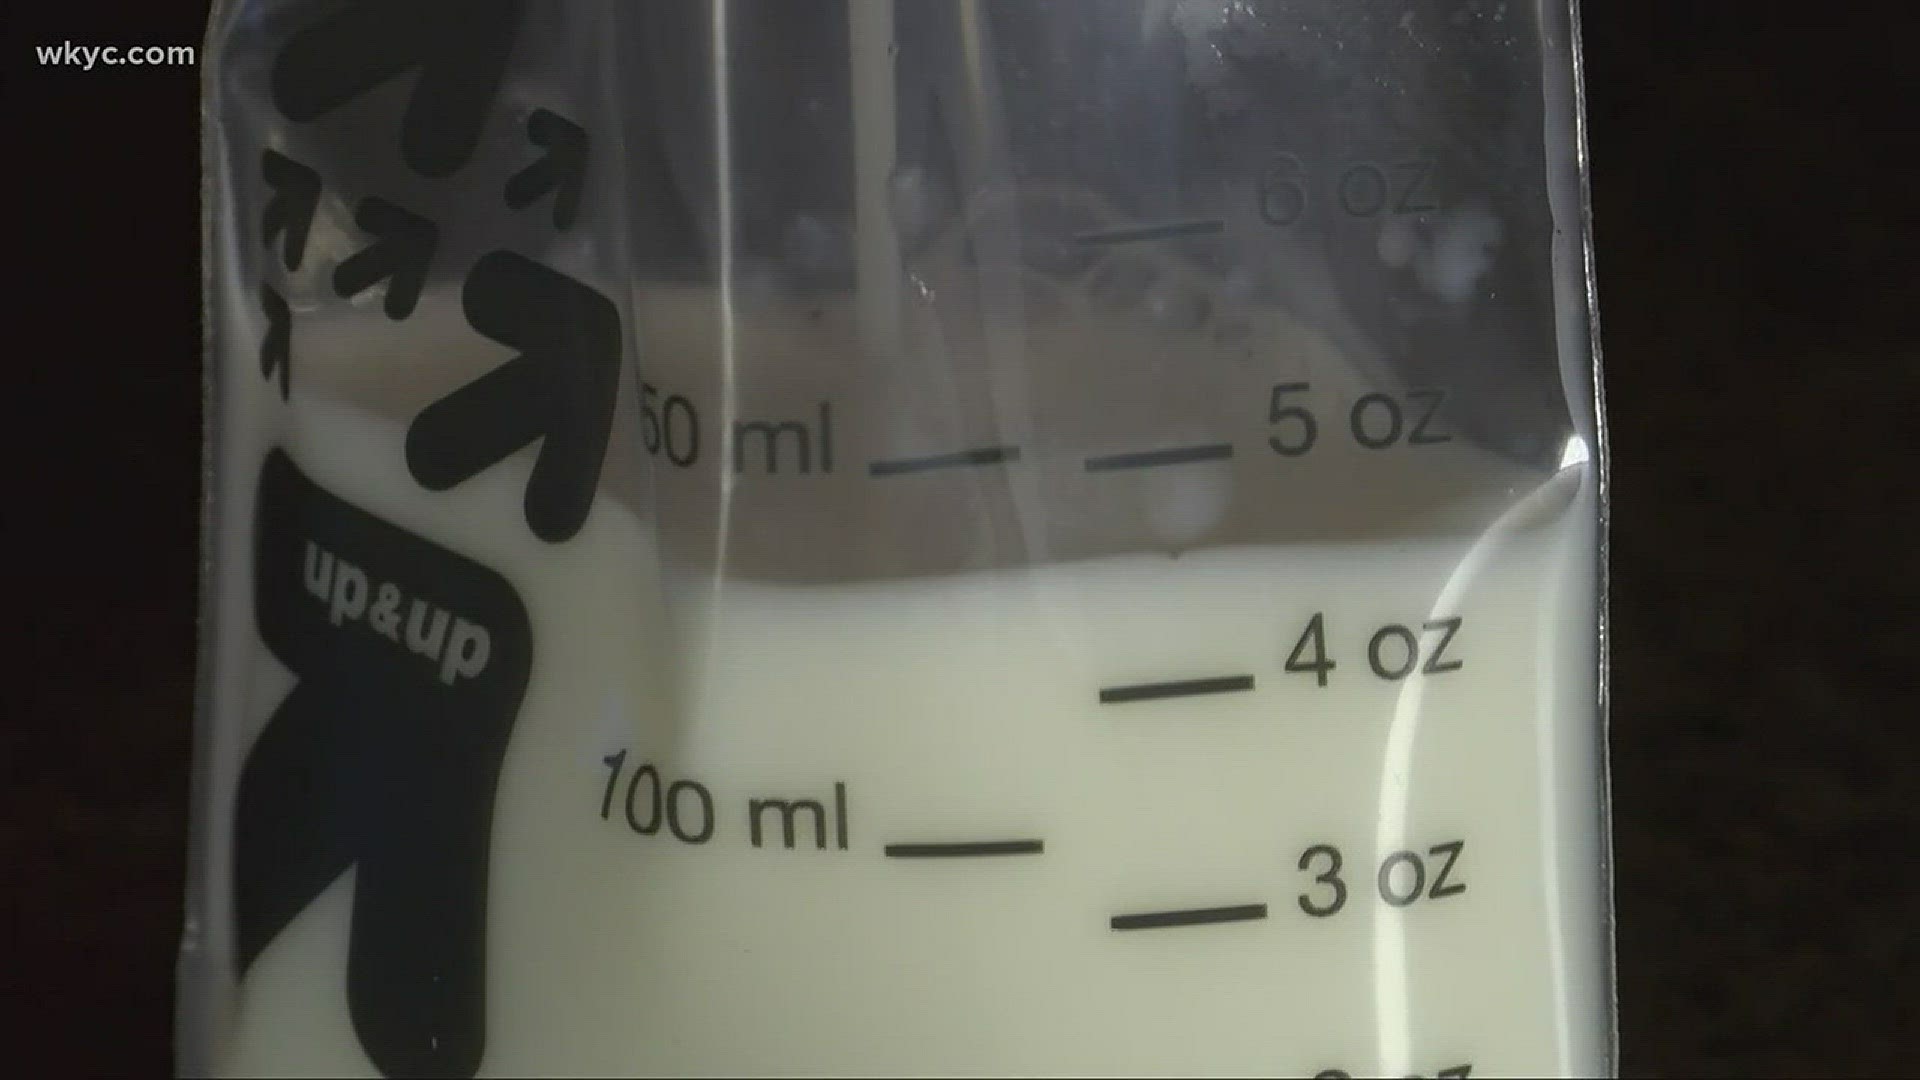 VERIFY: Is it legal to buy and sell human breast milk?